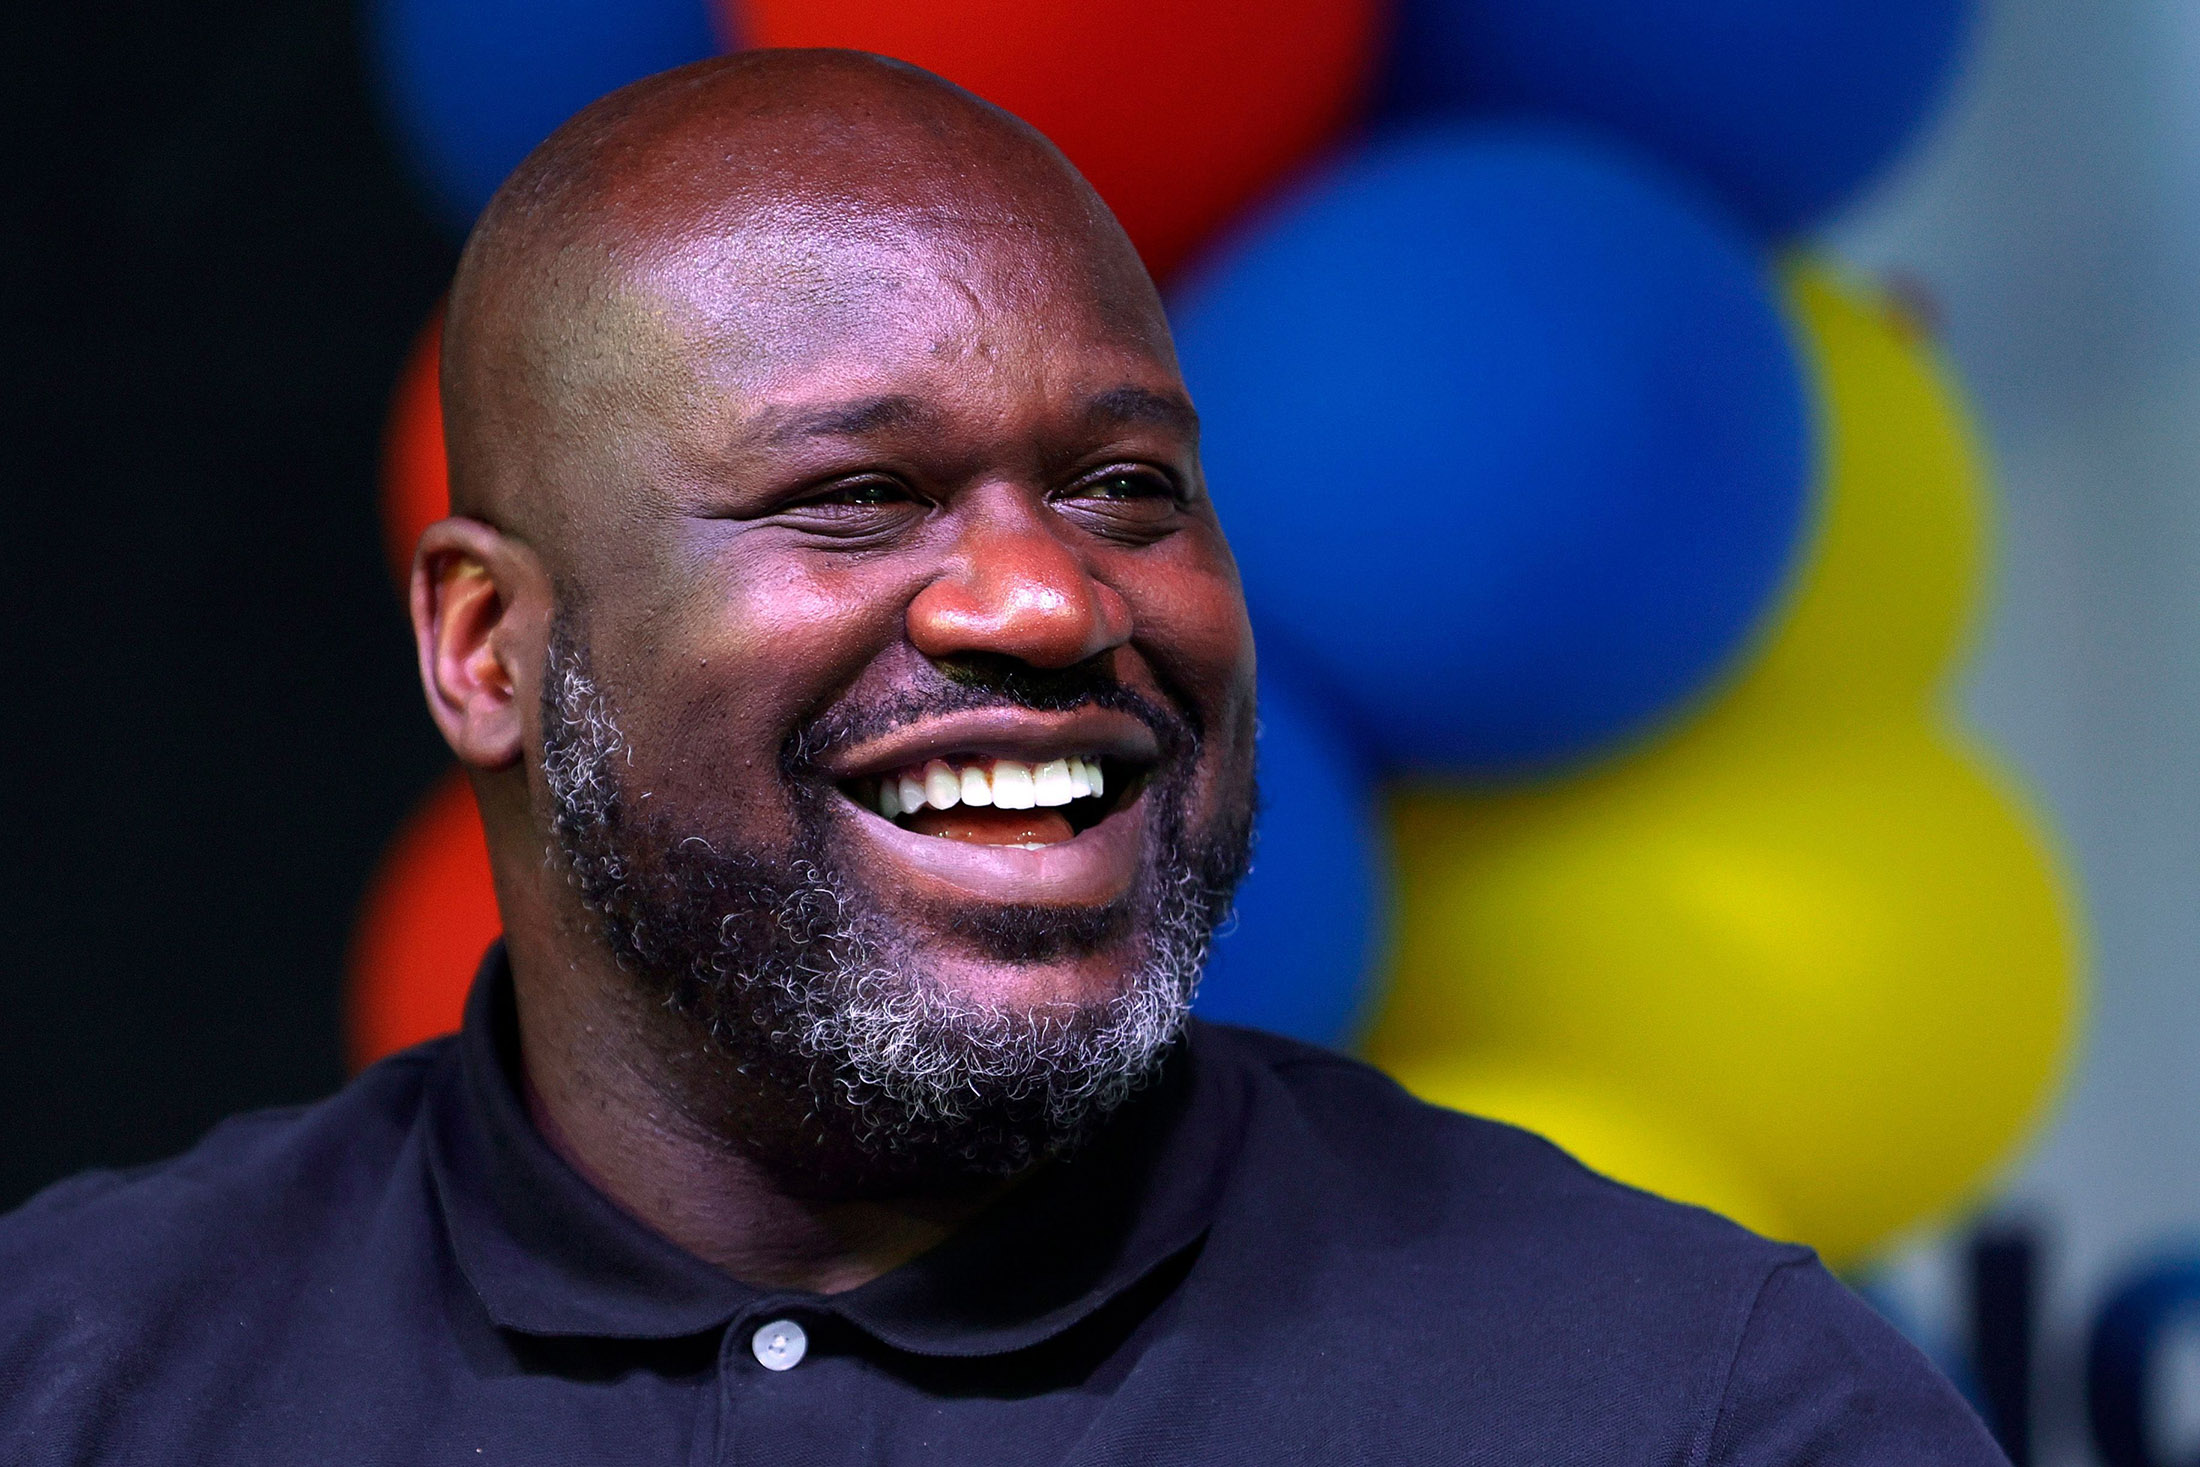 Forever 21 Brand History: Beginnings, Bankruptcy & the Shaq